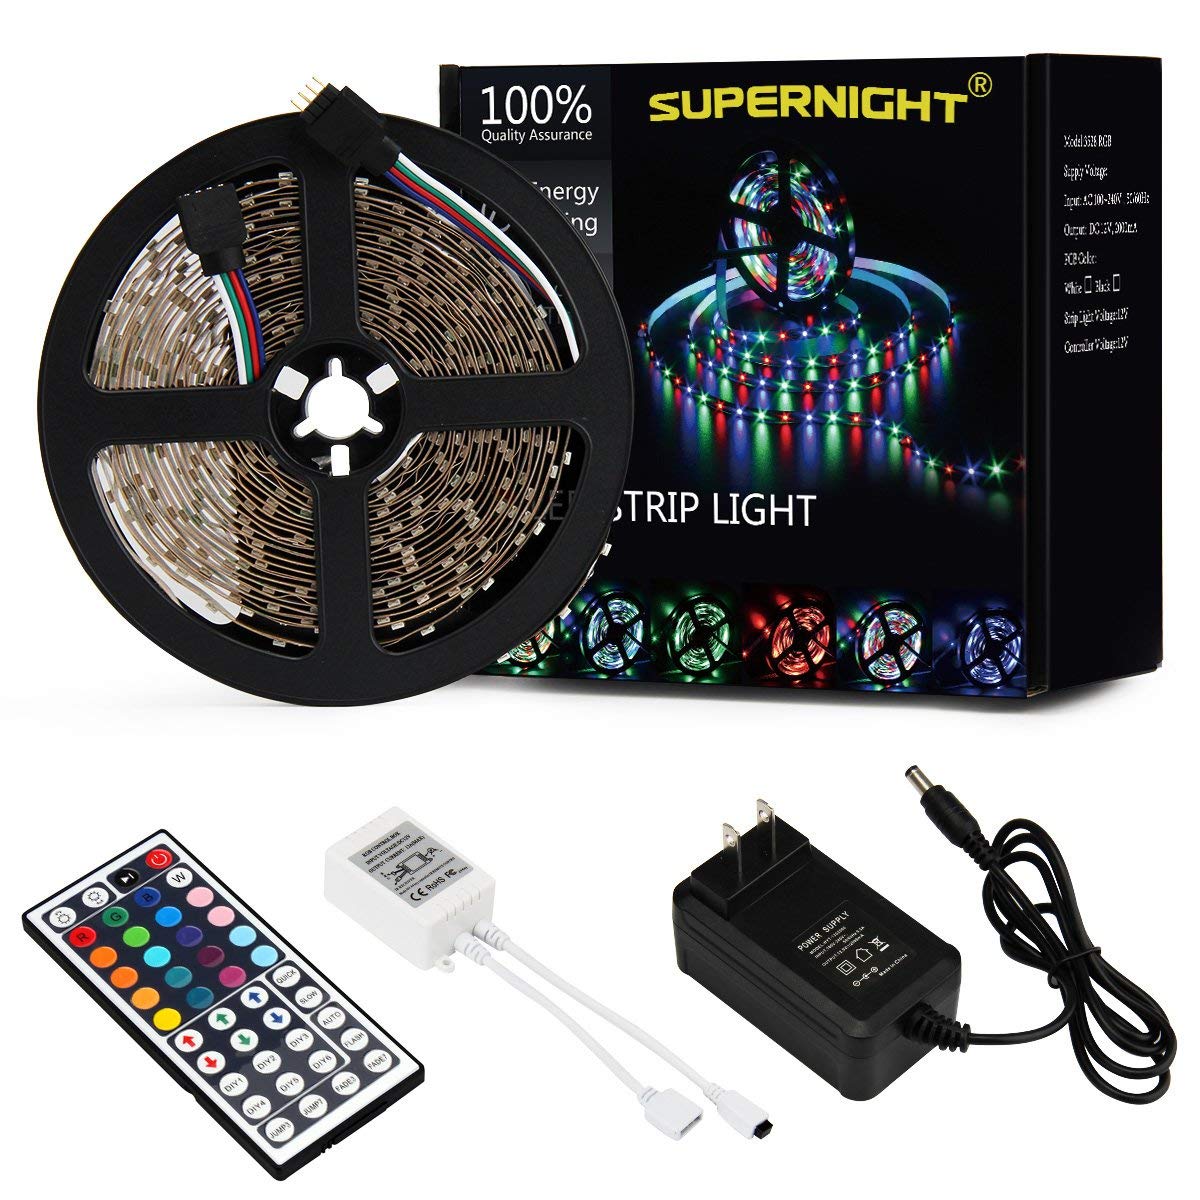 SUPERNIGHT 16.4Ft RGB 3528 SMD 300LEDs Strip Lights Kit Non-waterproof, with 12V 3A Power Supply and 44 Key IR Remote Controller